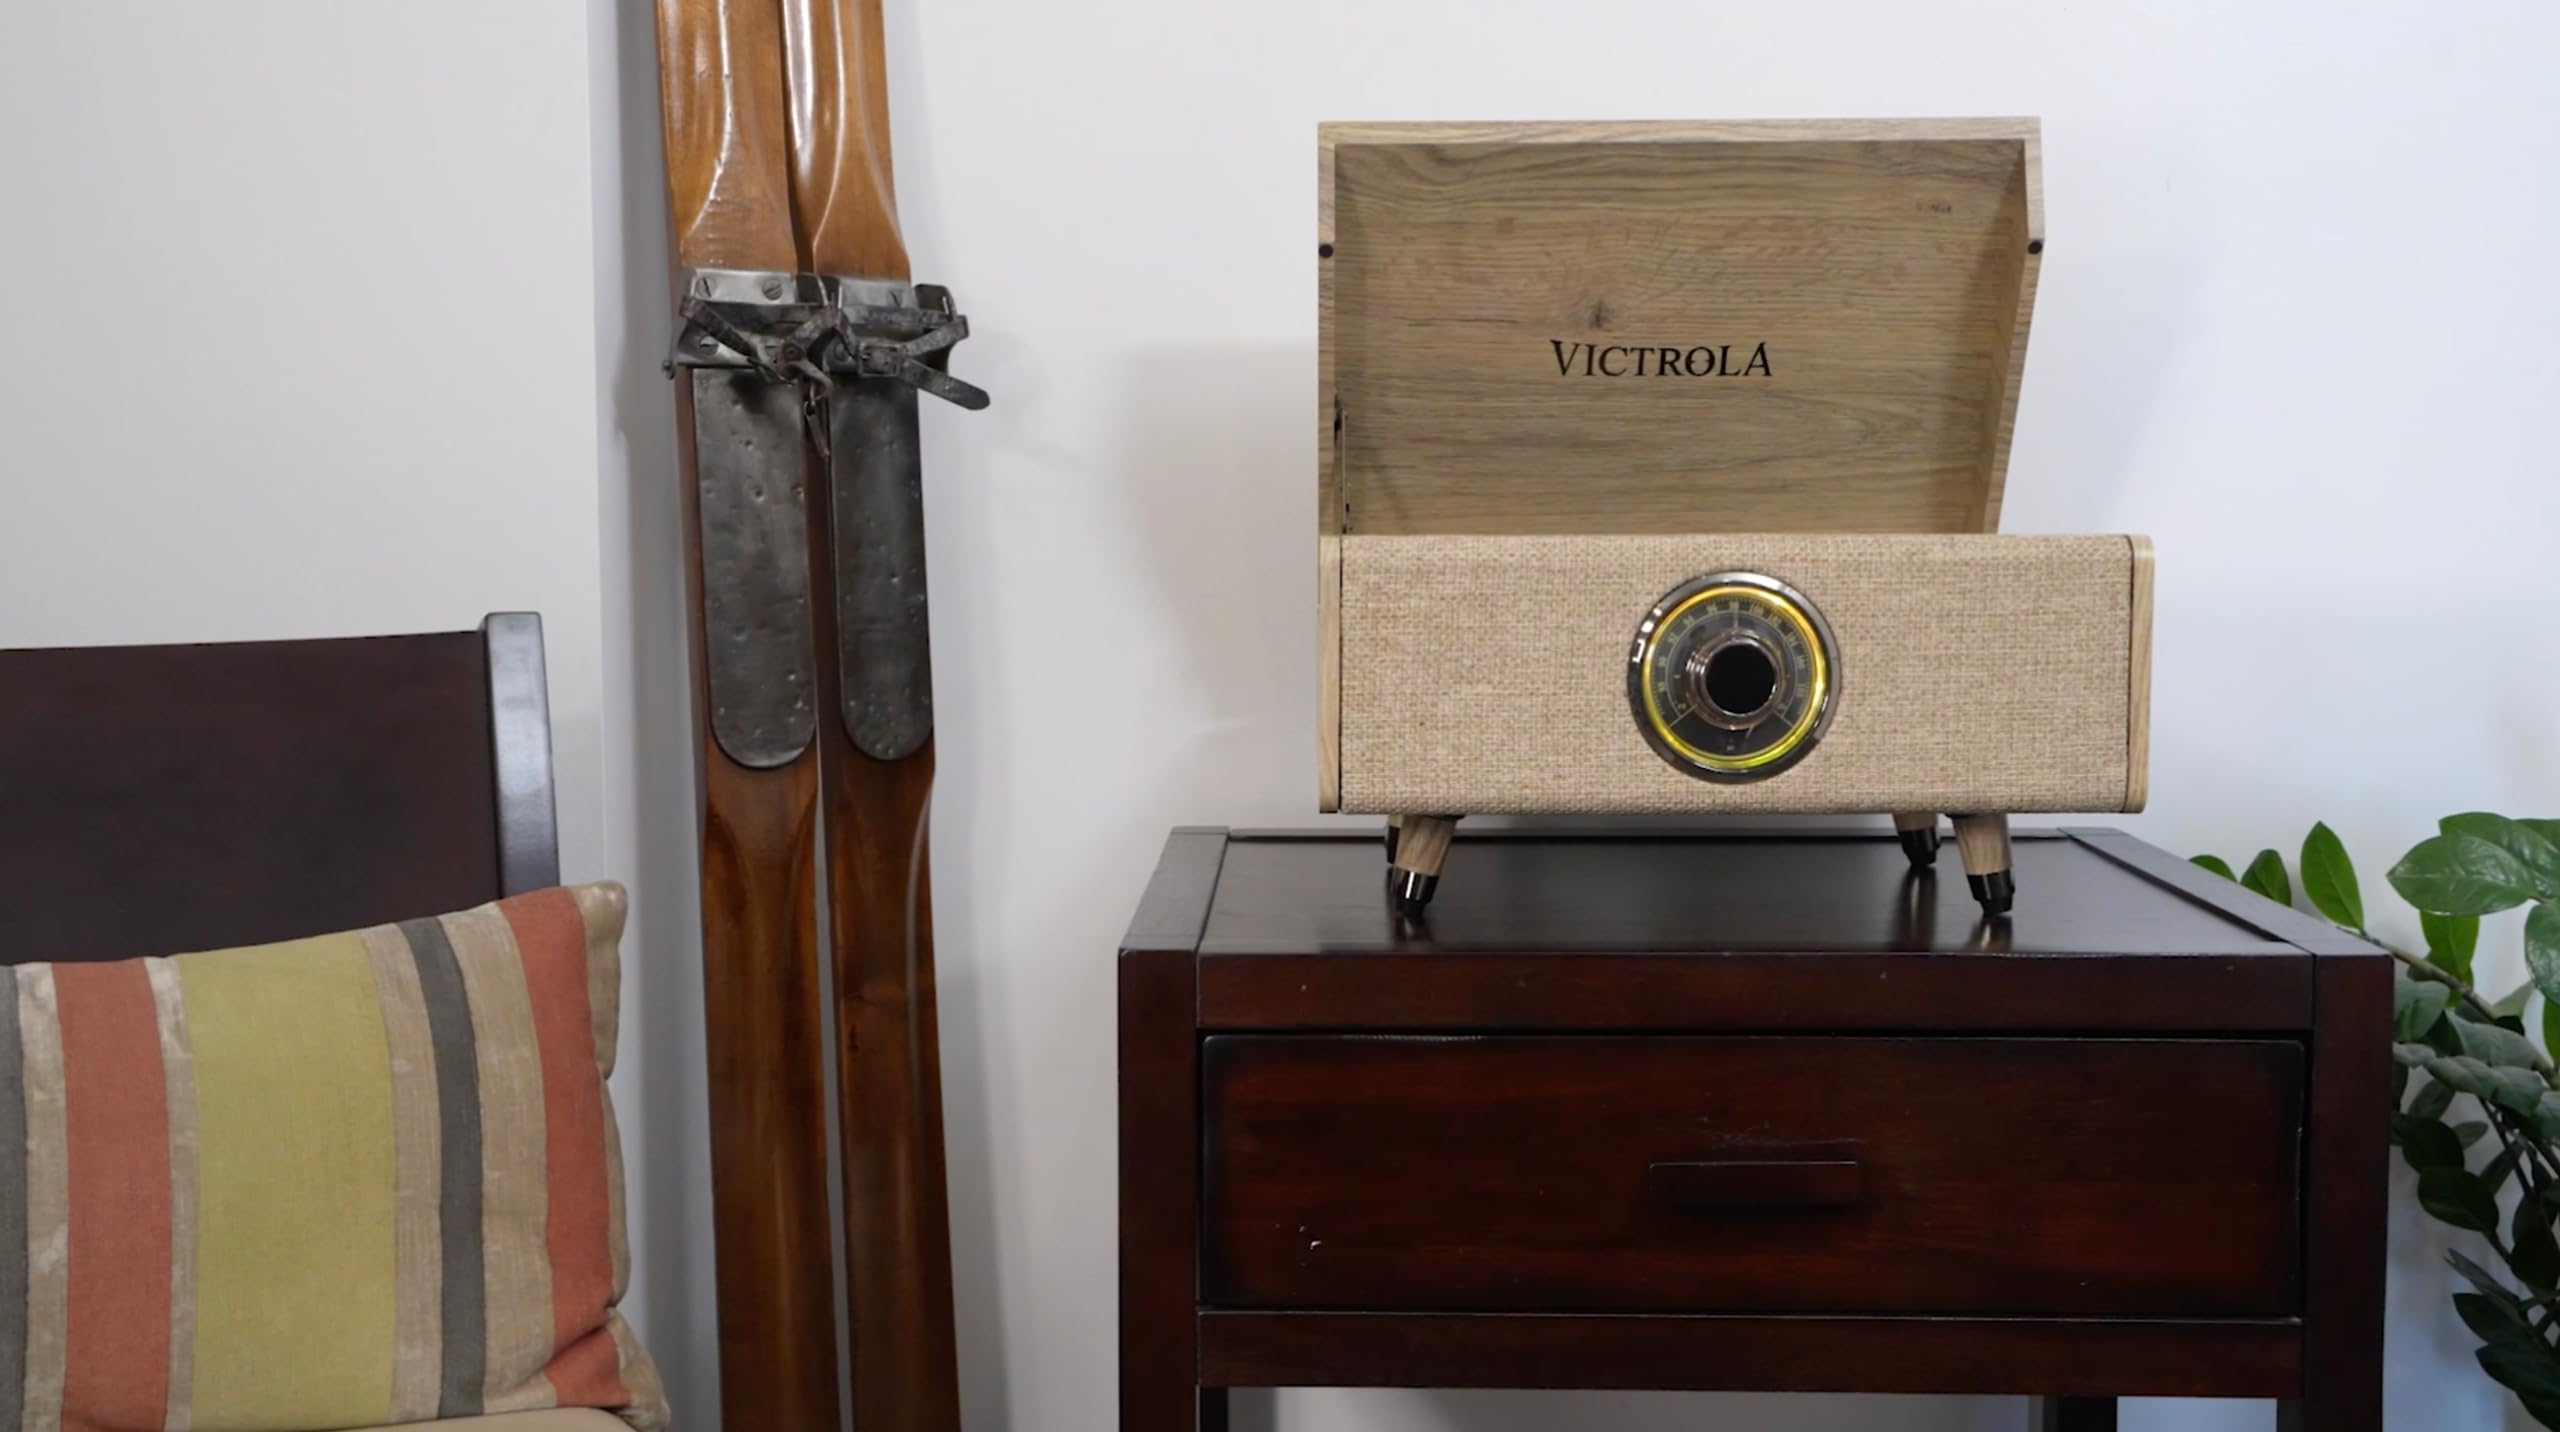 Victrola's 4-in-1 Highland Bluetooth Record Player with 3-Speed Turntable with FM Radio, Espresso (VTA-330B-ESP)